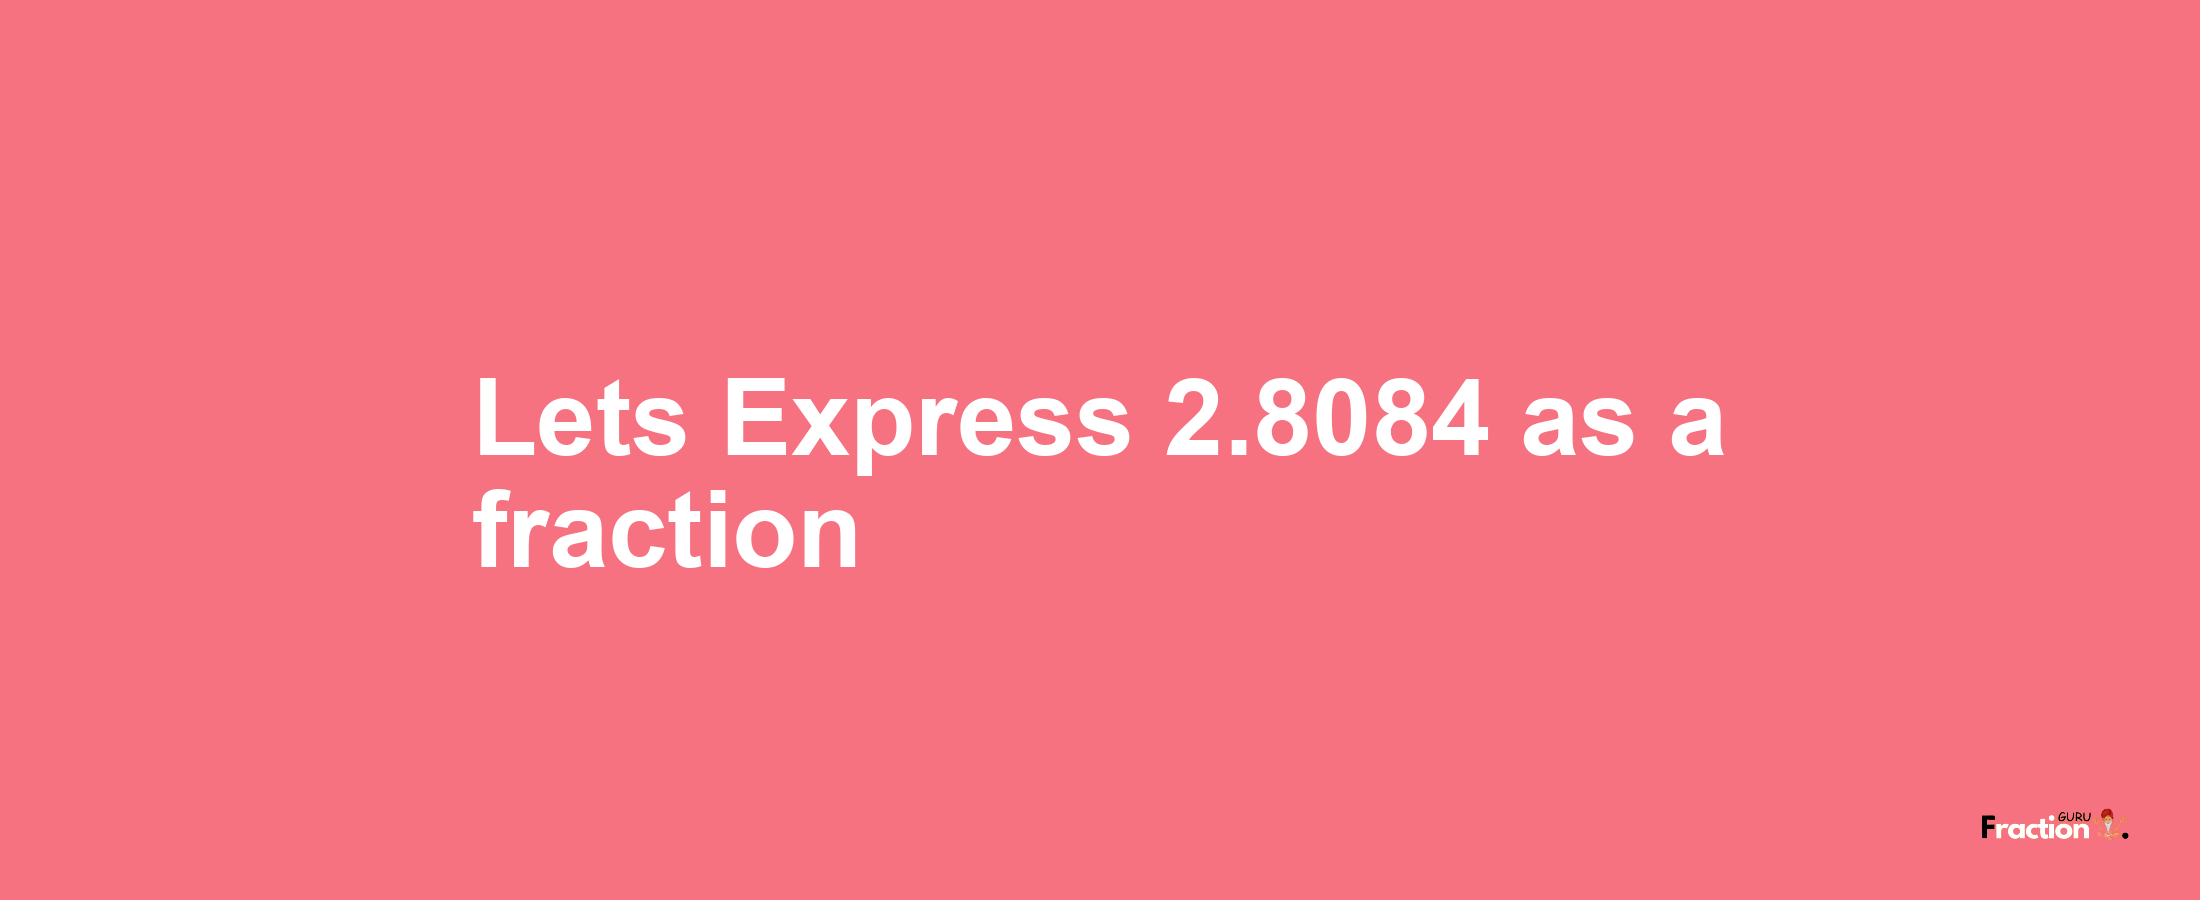 Lets Express 2.8084 as afraction